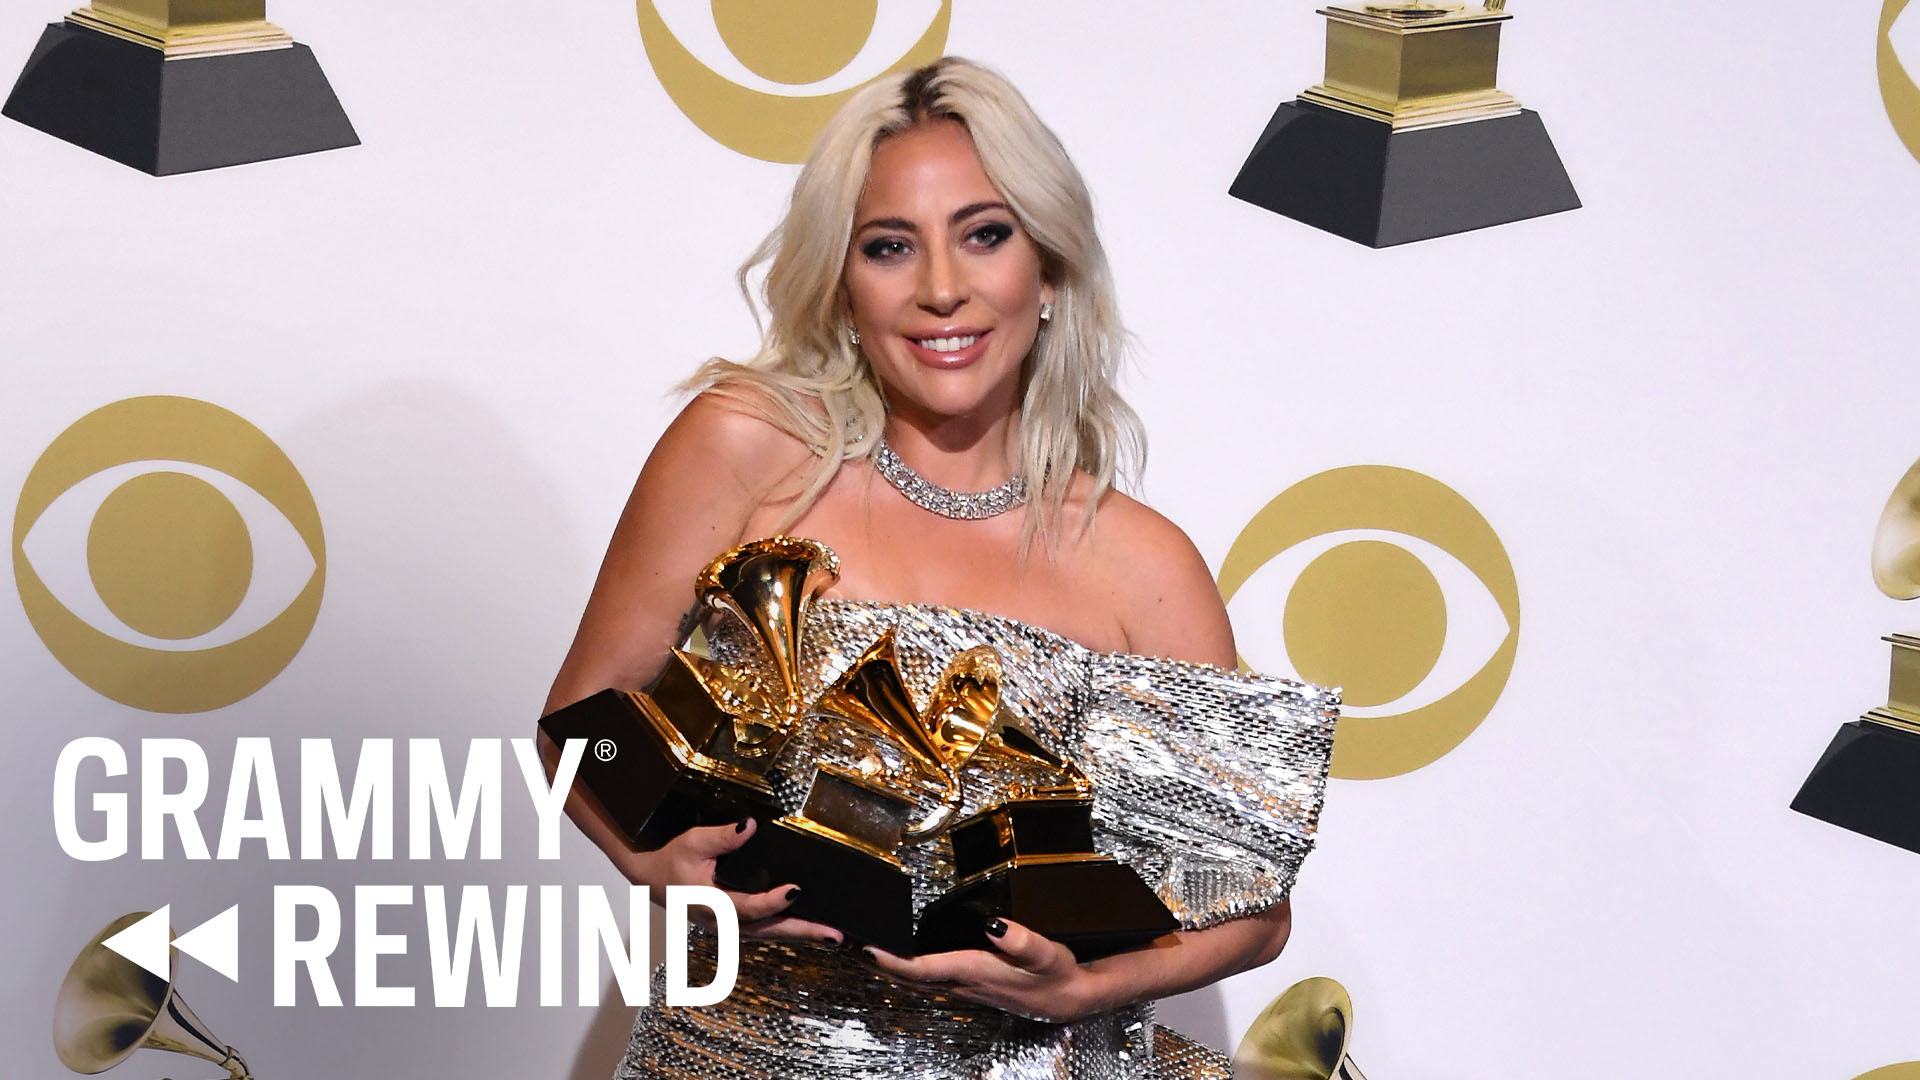 Watch Lady Gaga Advocate For Mental Health Awareness During Her Win For "Shallow" In 2019 | GRAMMY Rewind